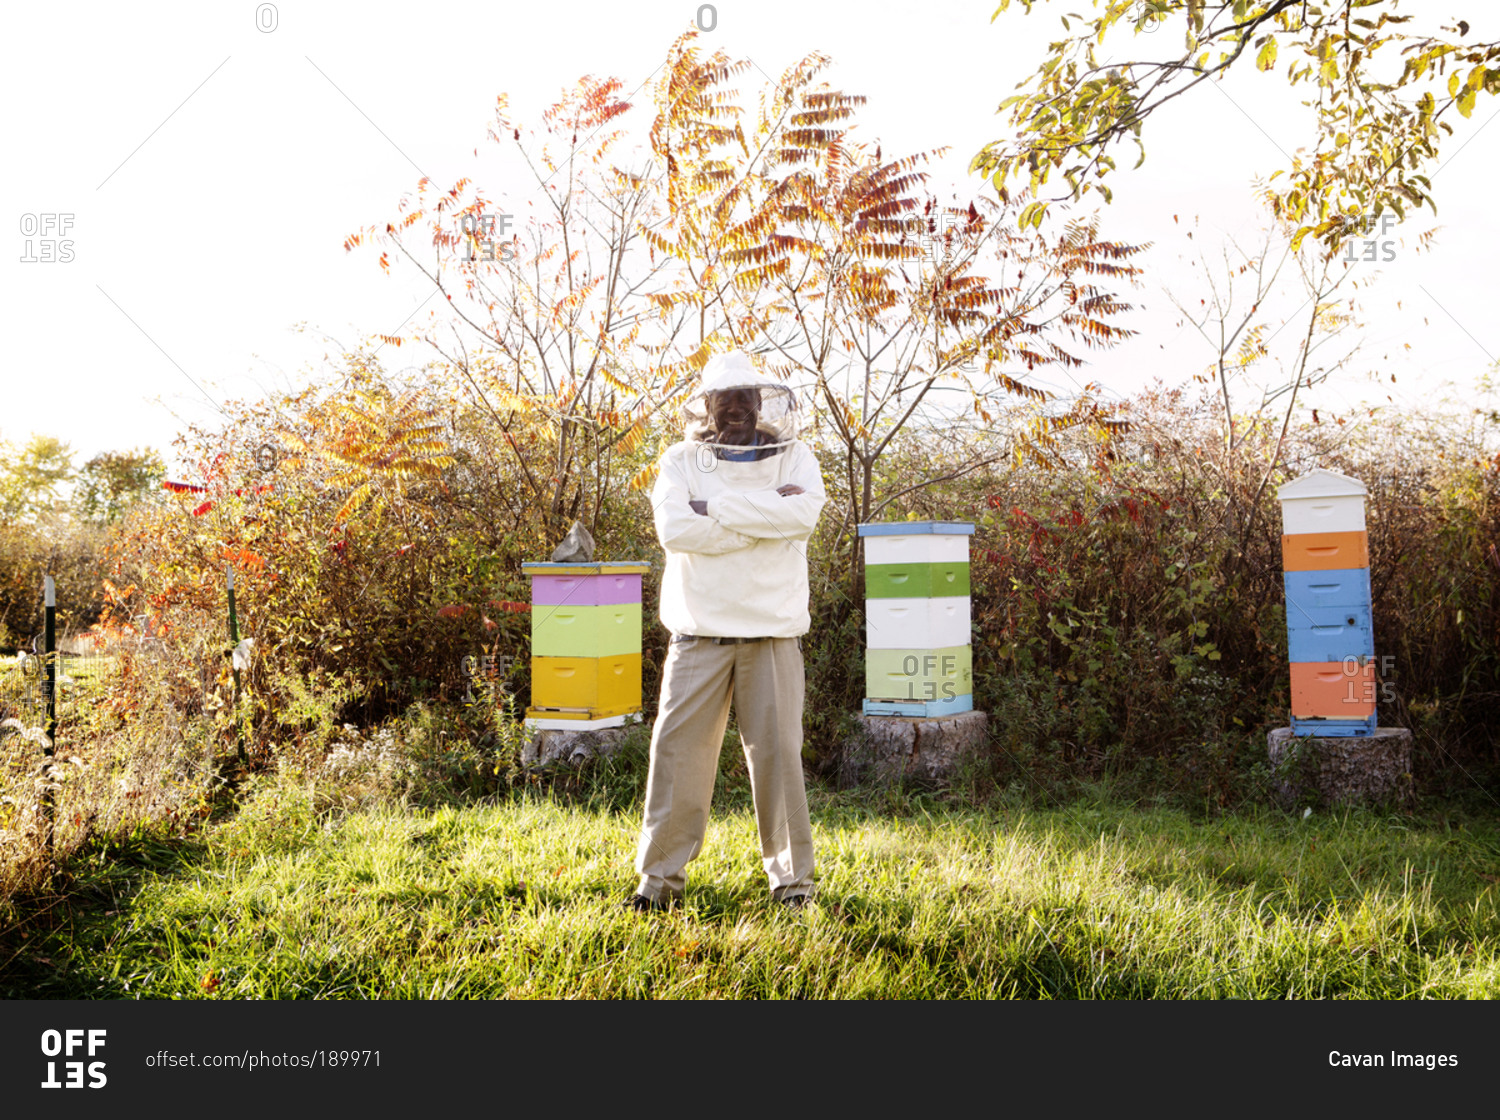 Portrait of a beekeeper standing with his hives